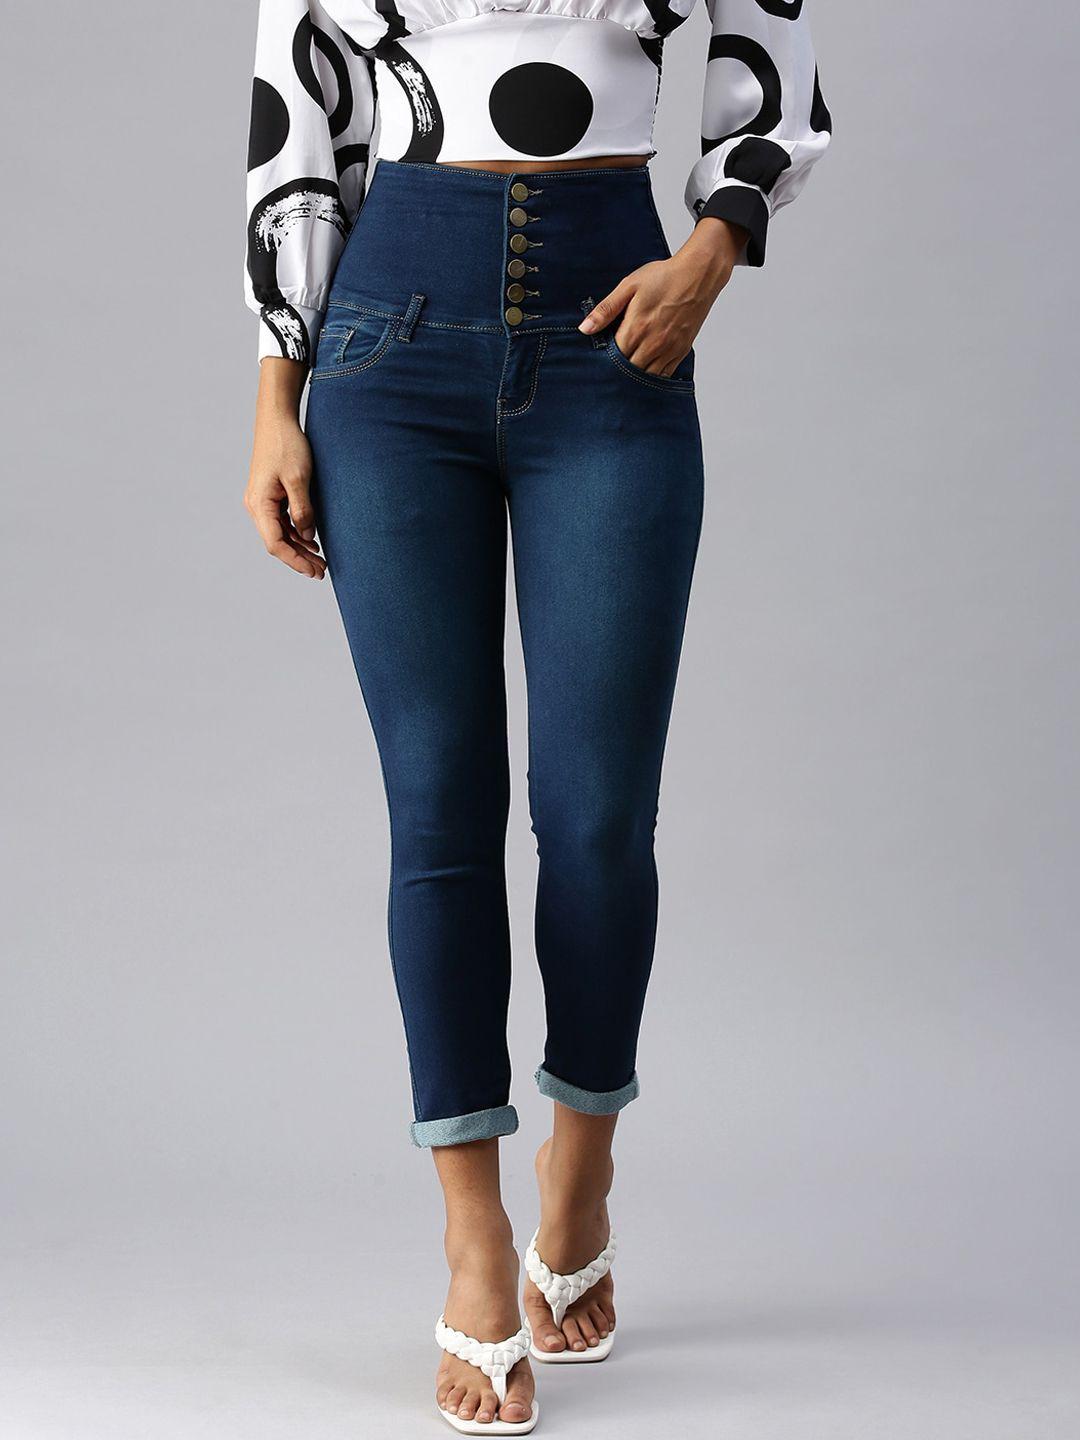 showoff-women-navy-blue-slim-fit-high-rise-light-fade-stretchable-jeans